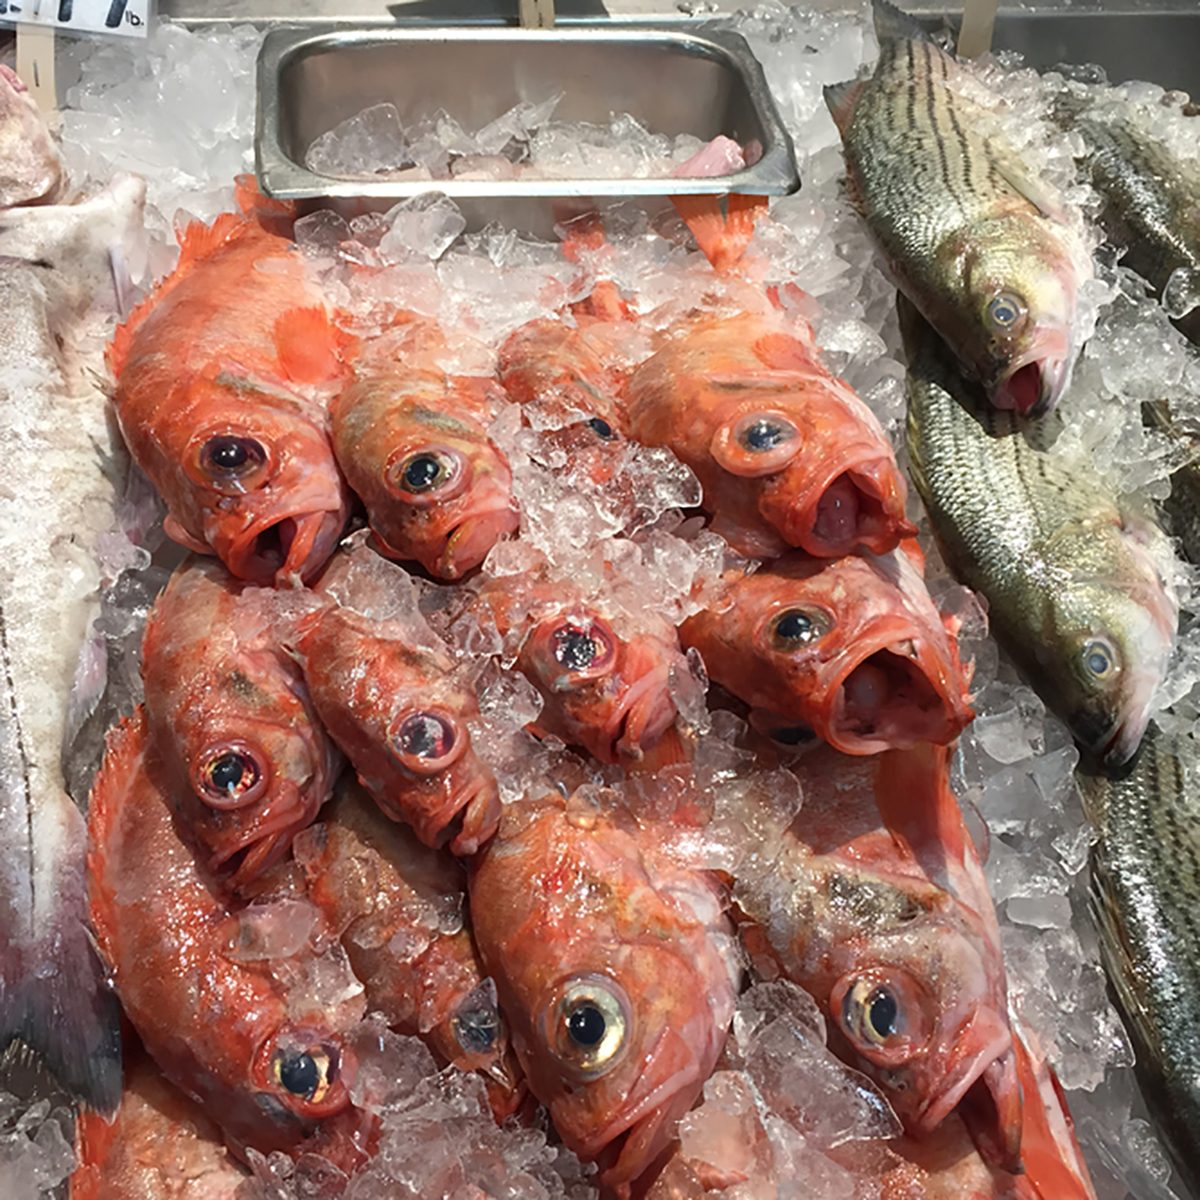 Display of three kinds of fresh fish on ice in a fish market in Portland, Maine